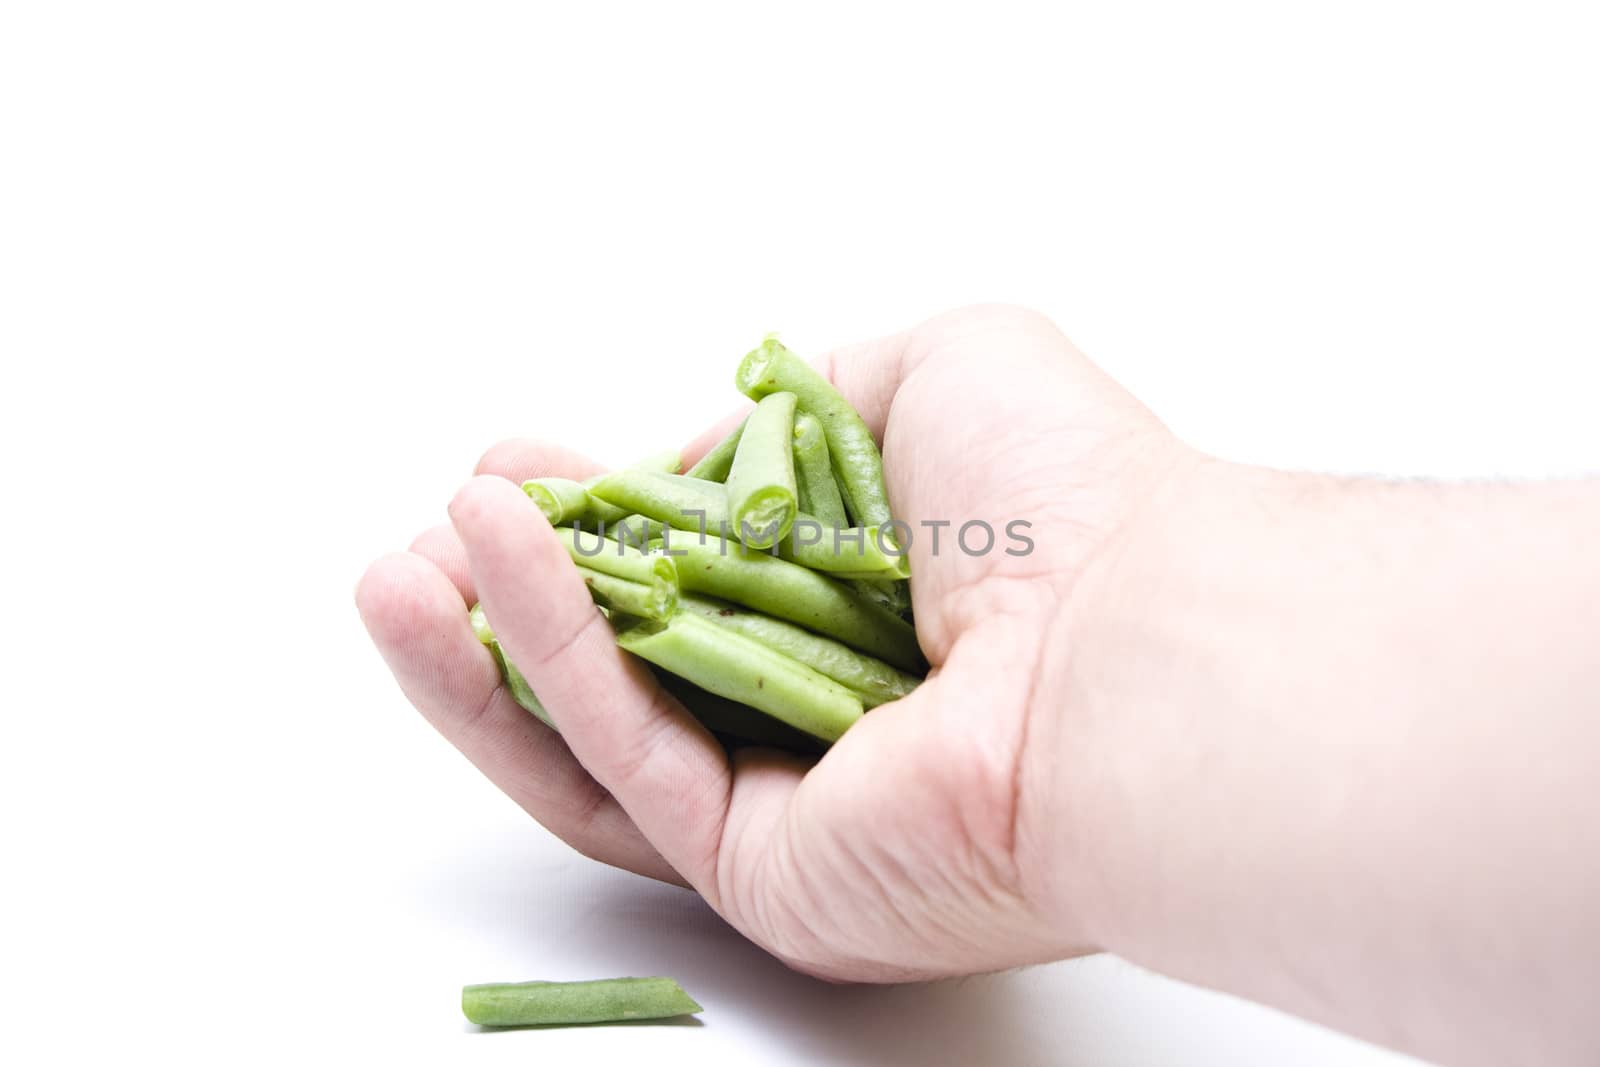 Fresh Green Stick Beans in the Hand by KEVMA21